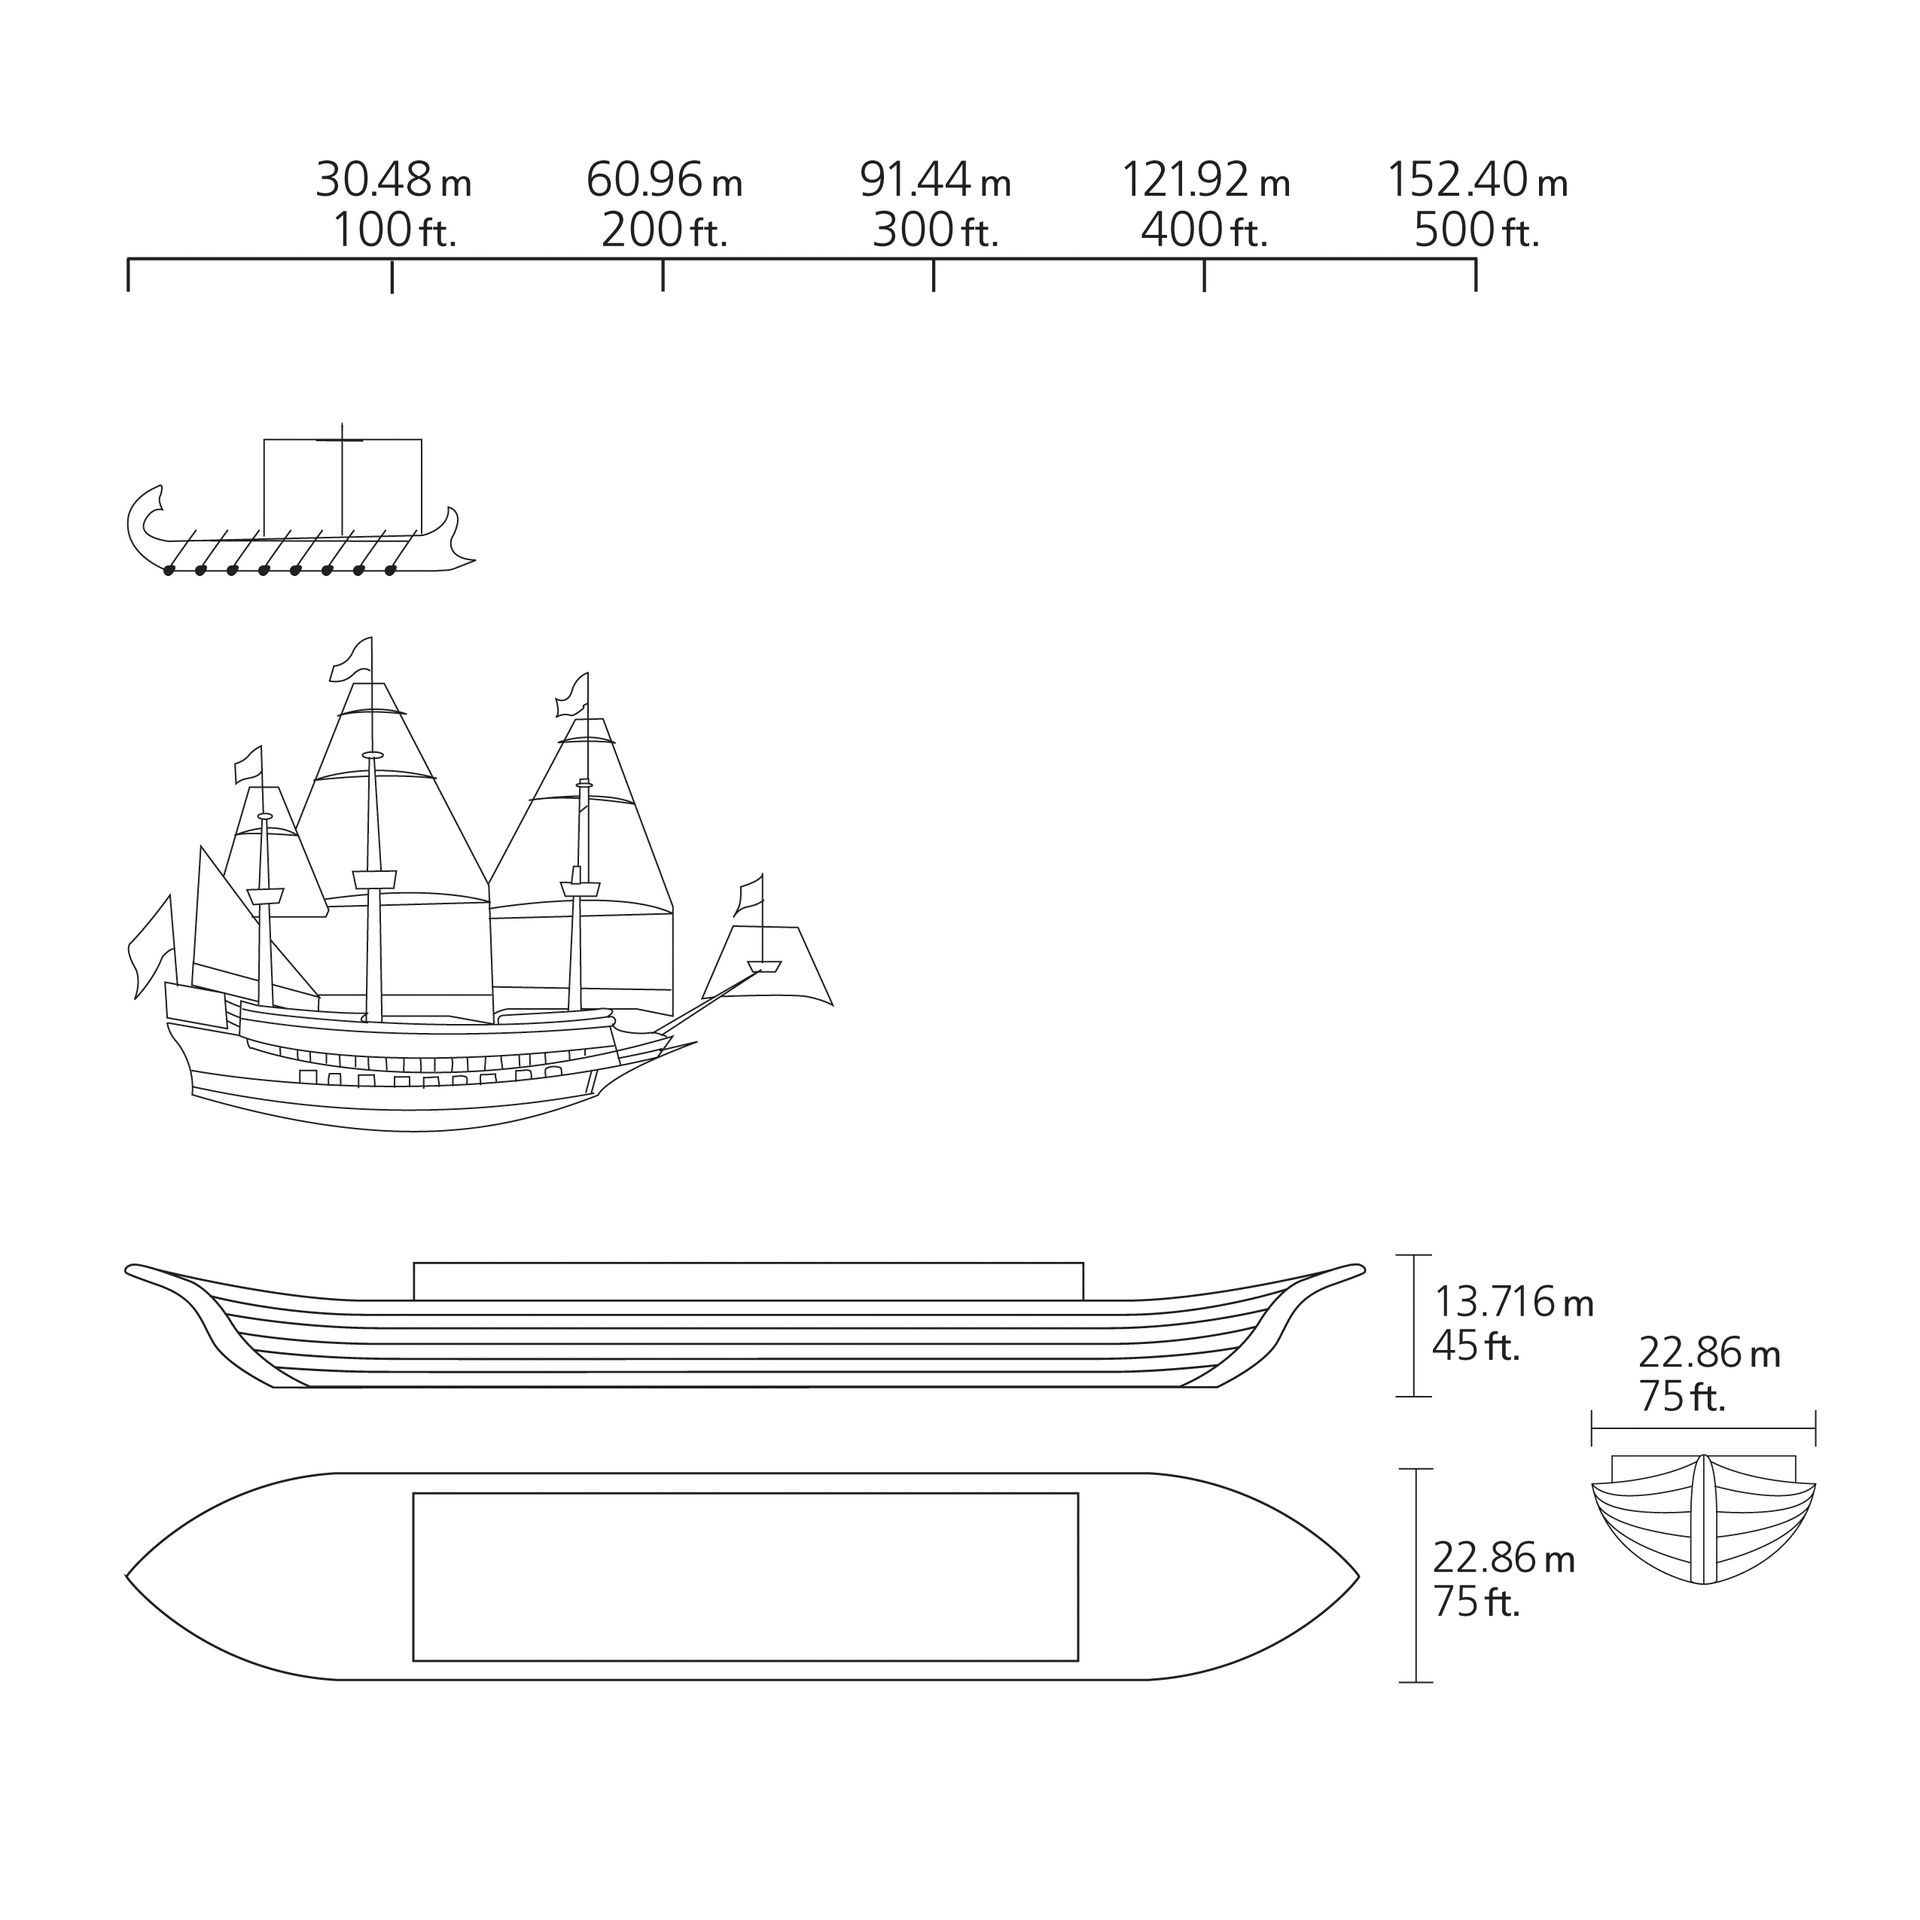 An illustration of the approximate dimensions of Noah’s ark in comparison to other ships.